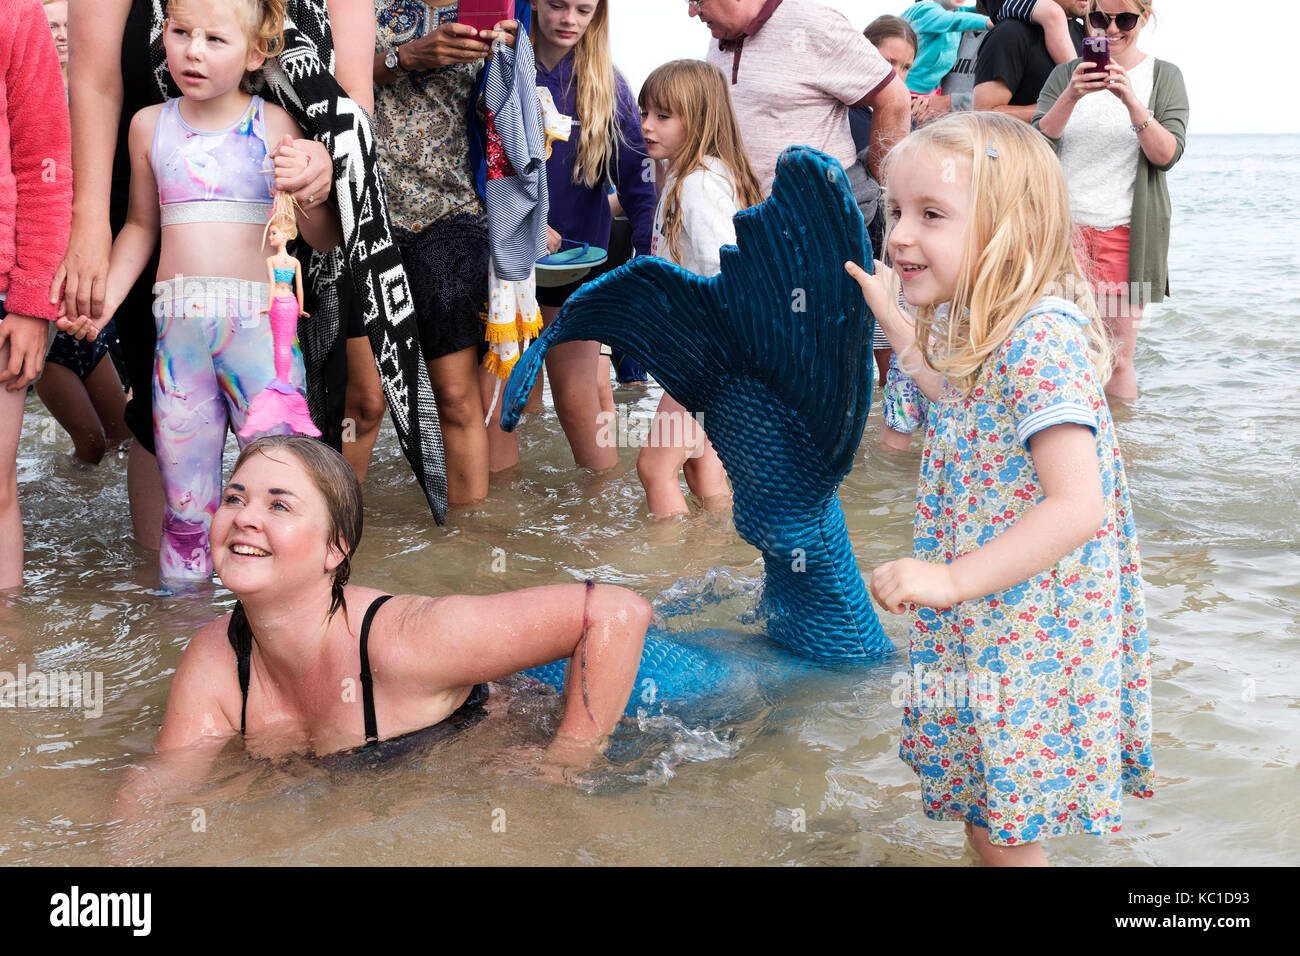 a young woman in fancy dress as a mermaid meets and greets children on the beach at st,ives in cornwall, england, uk, Stock Photo